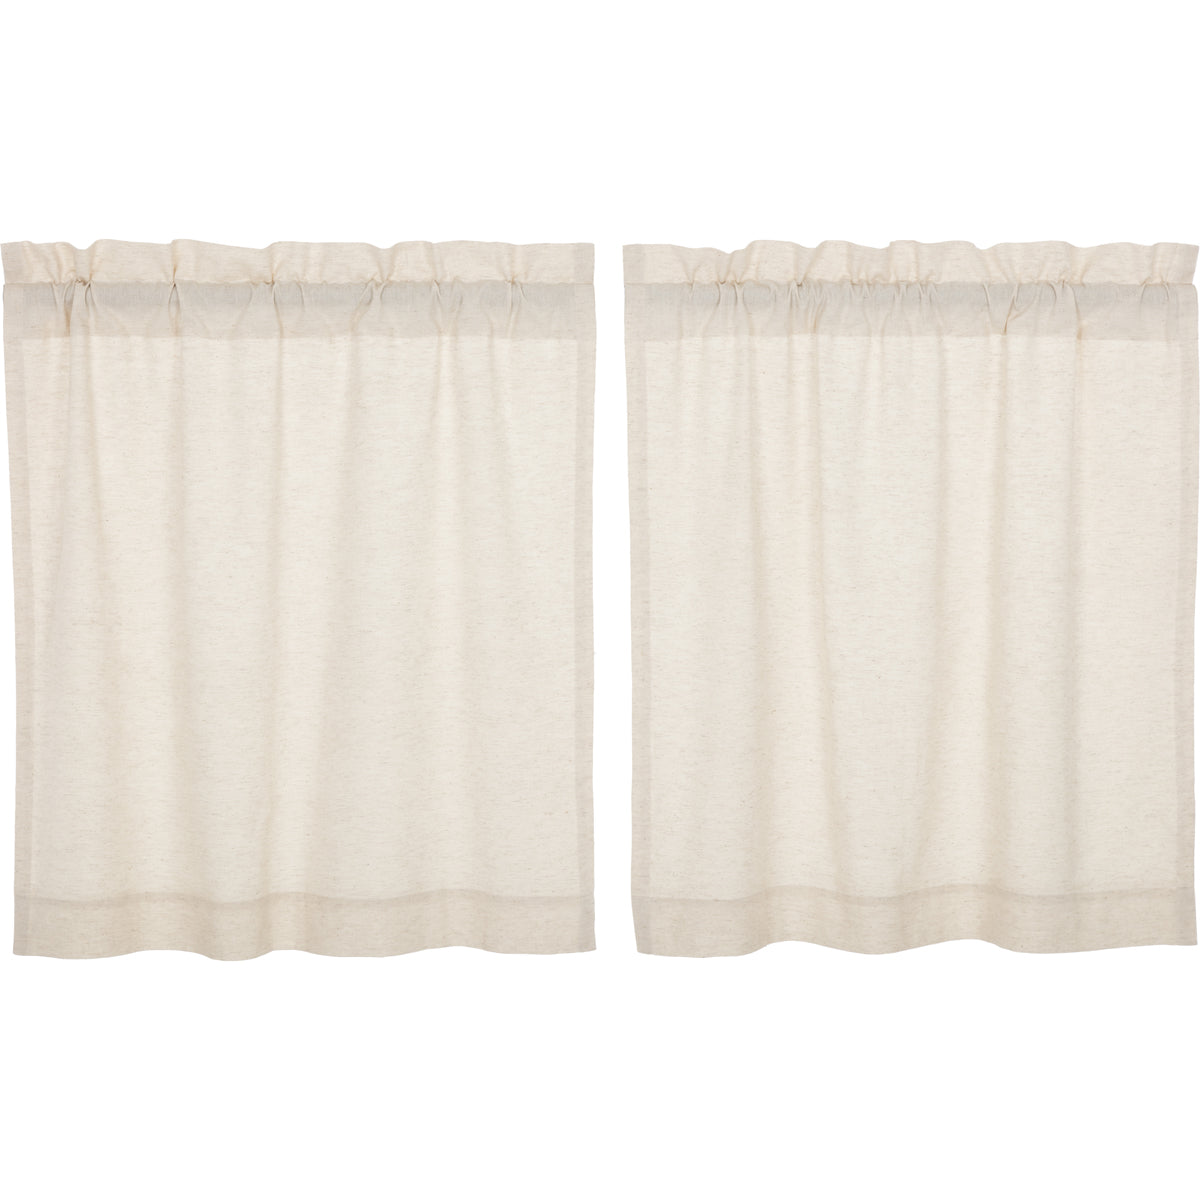 April & Olive Simple Life Flax Natural Tier Set of 2 L36xW36 By VHC Brands